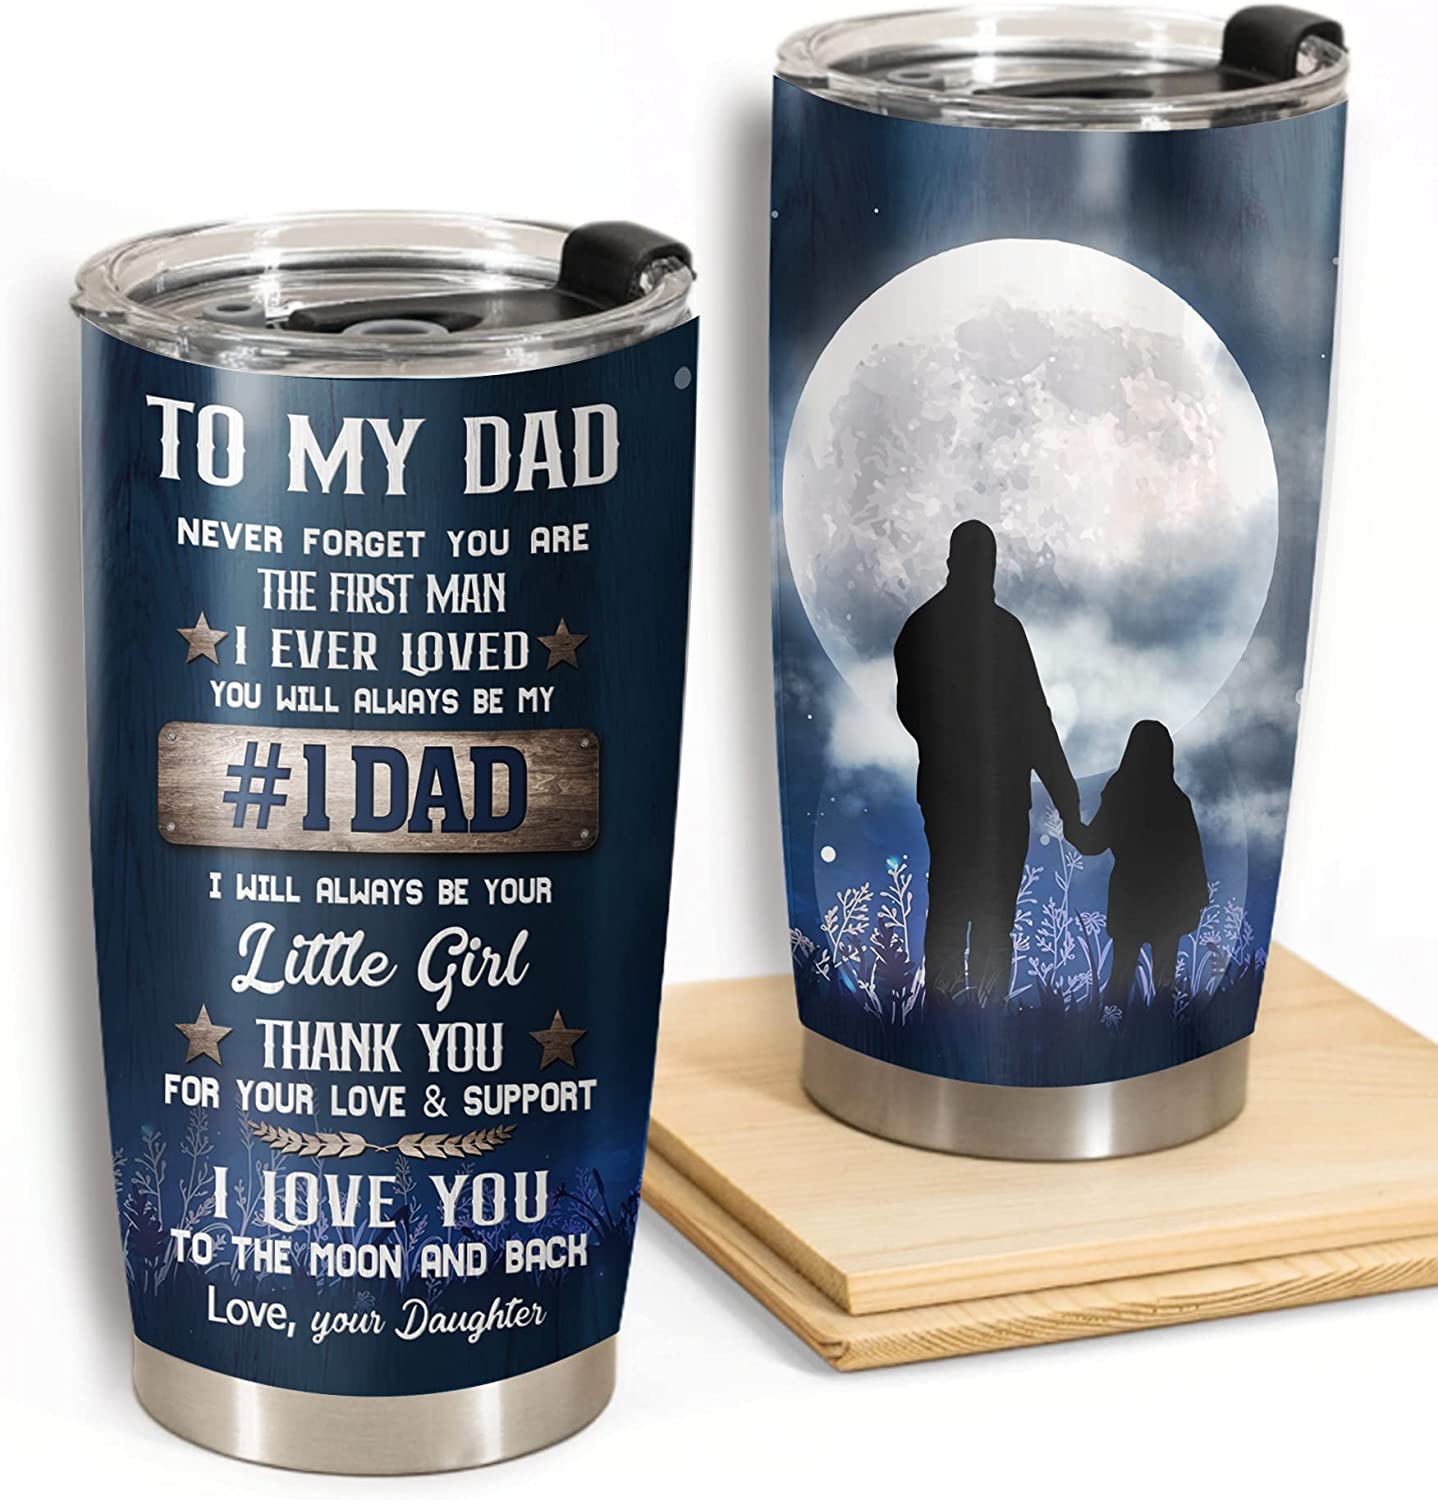 My Dad is Super Travel Thermos Mug Nice gift for Father's day.